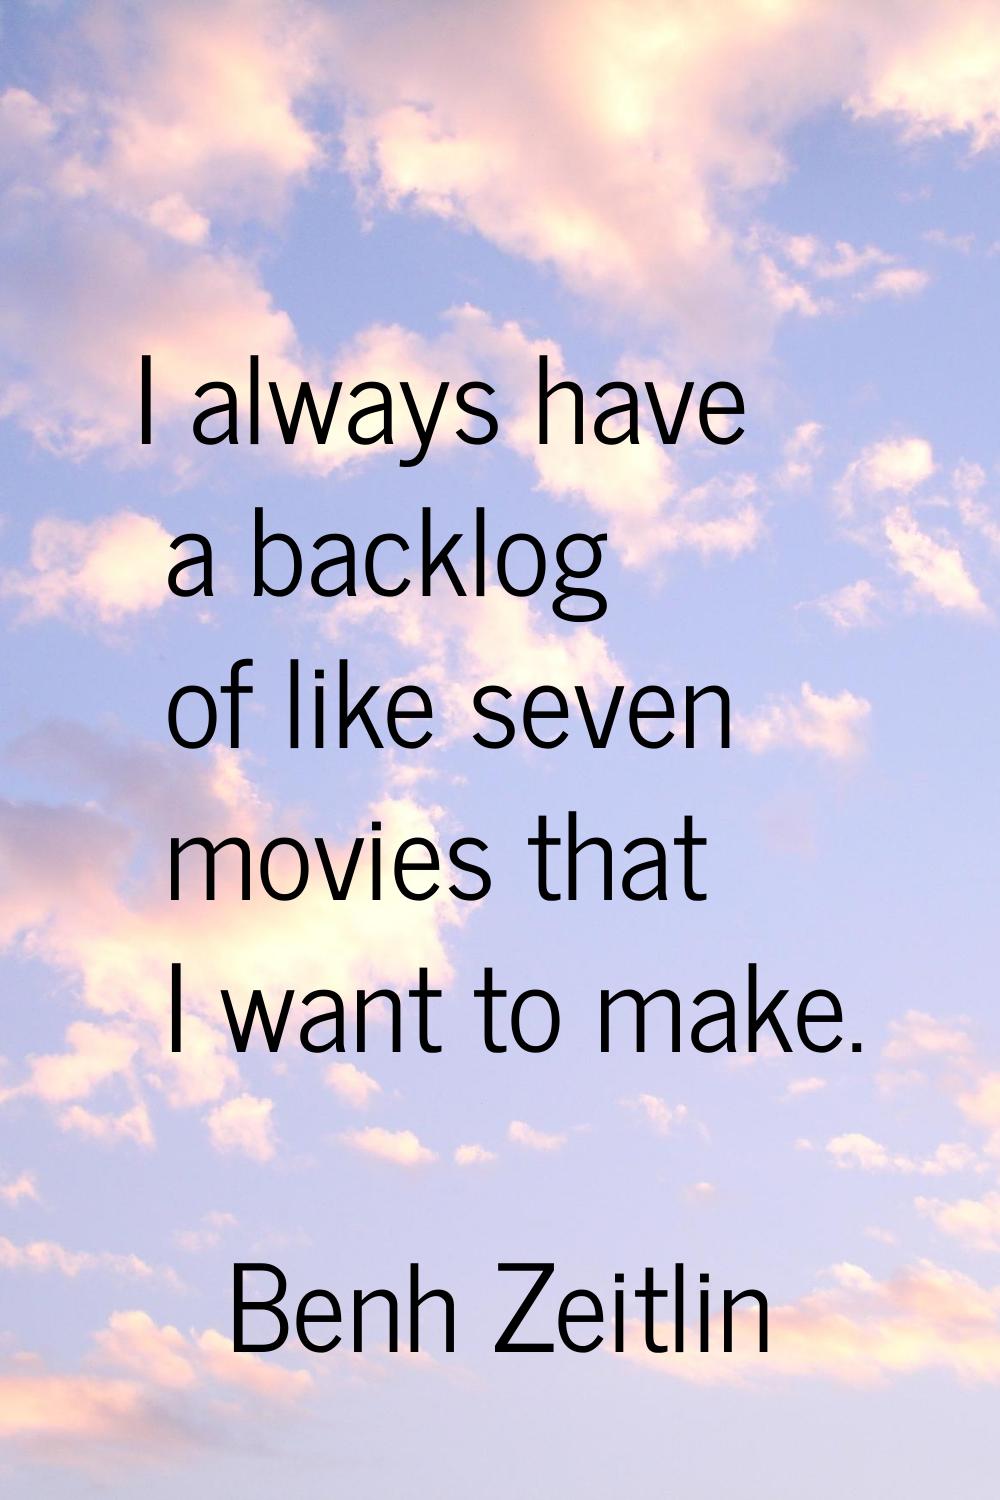 I always have a backlog of like seven movies that I want to make.